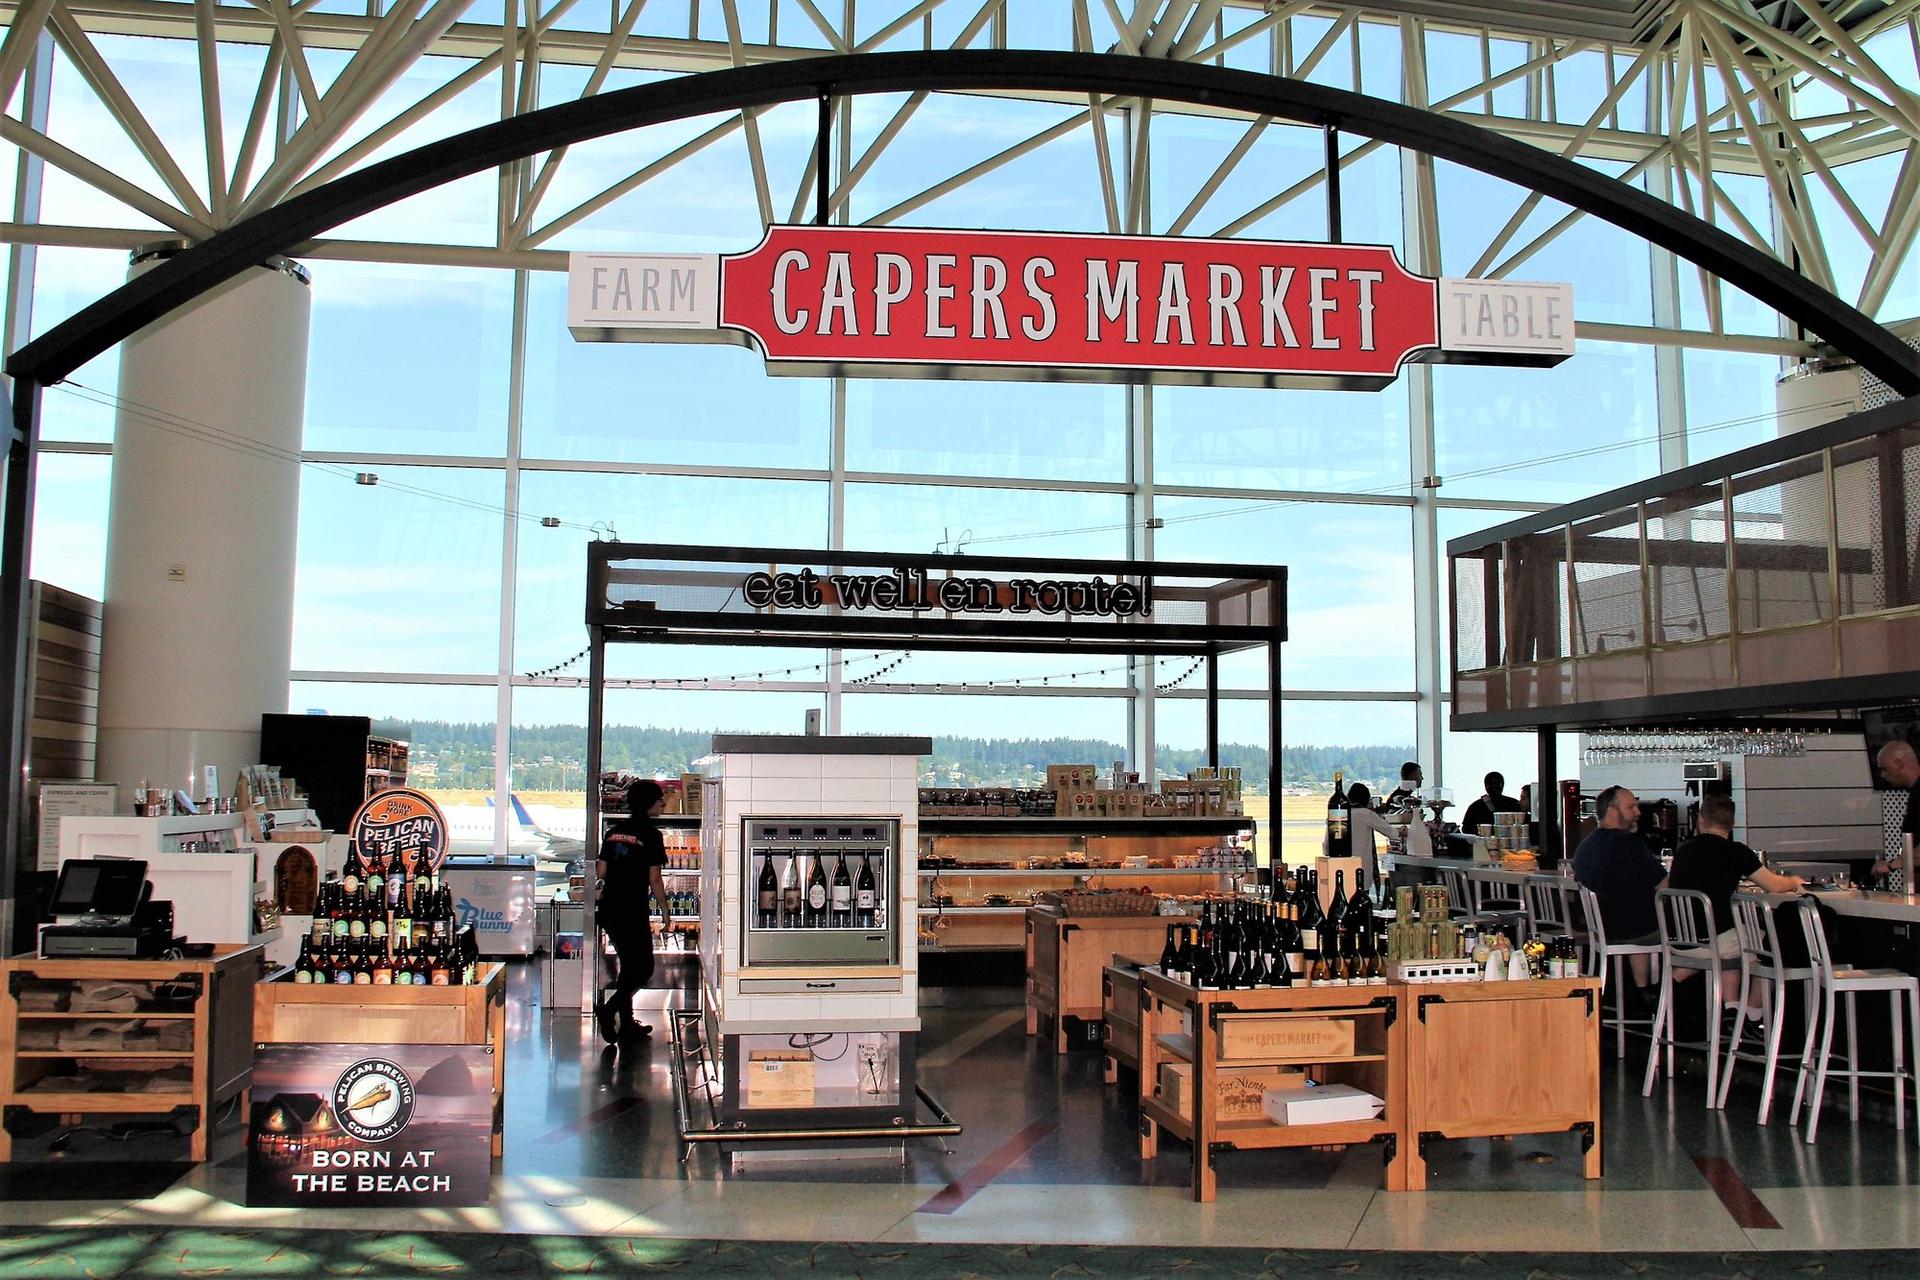 Capers Market image 33 of 46